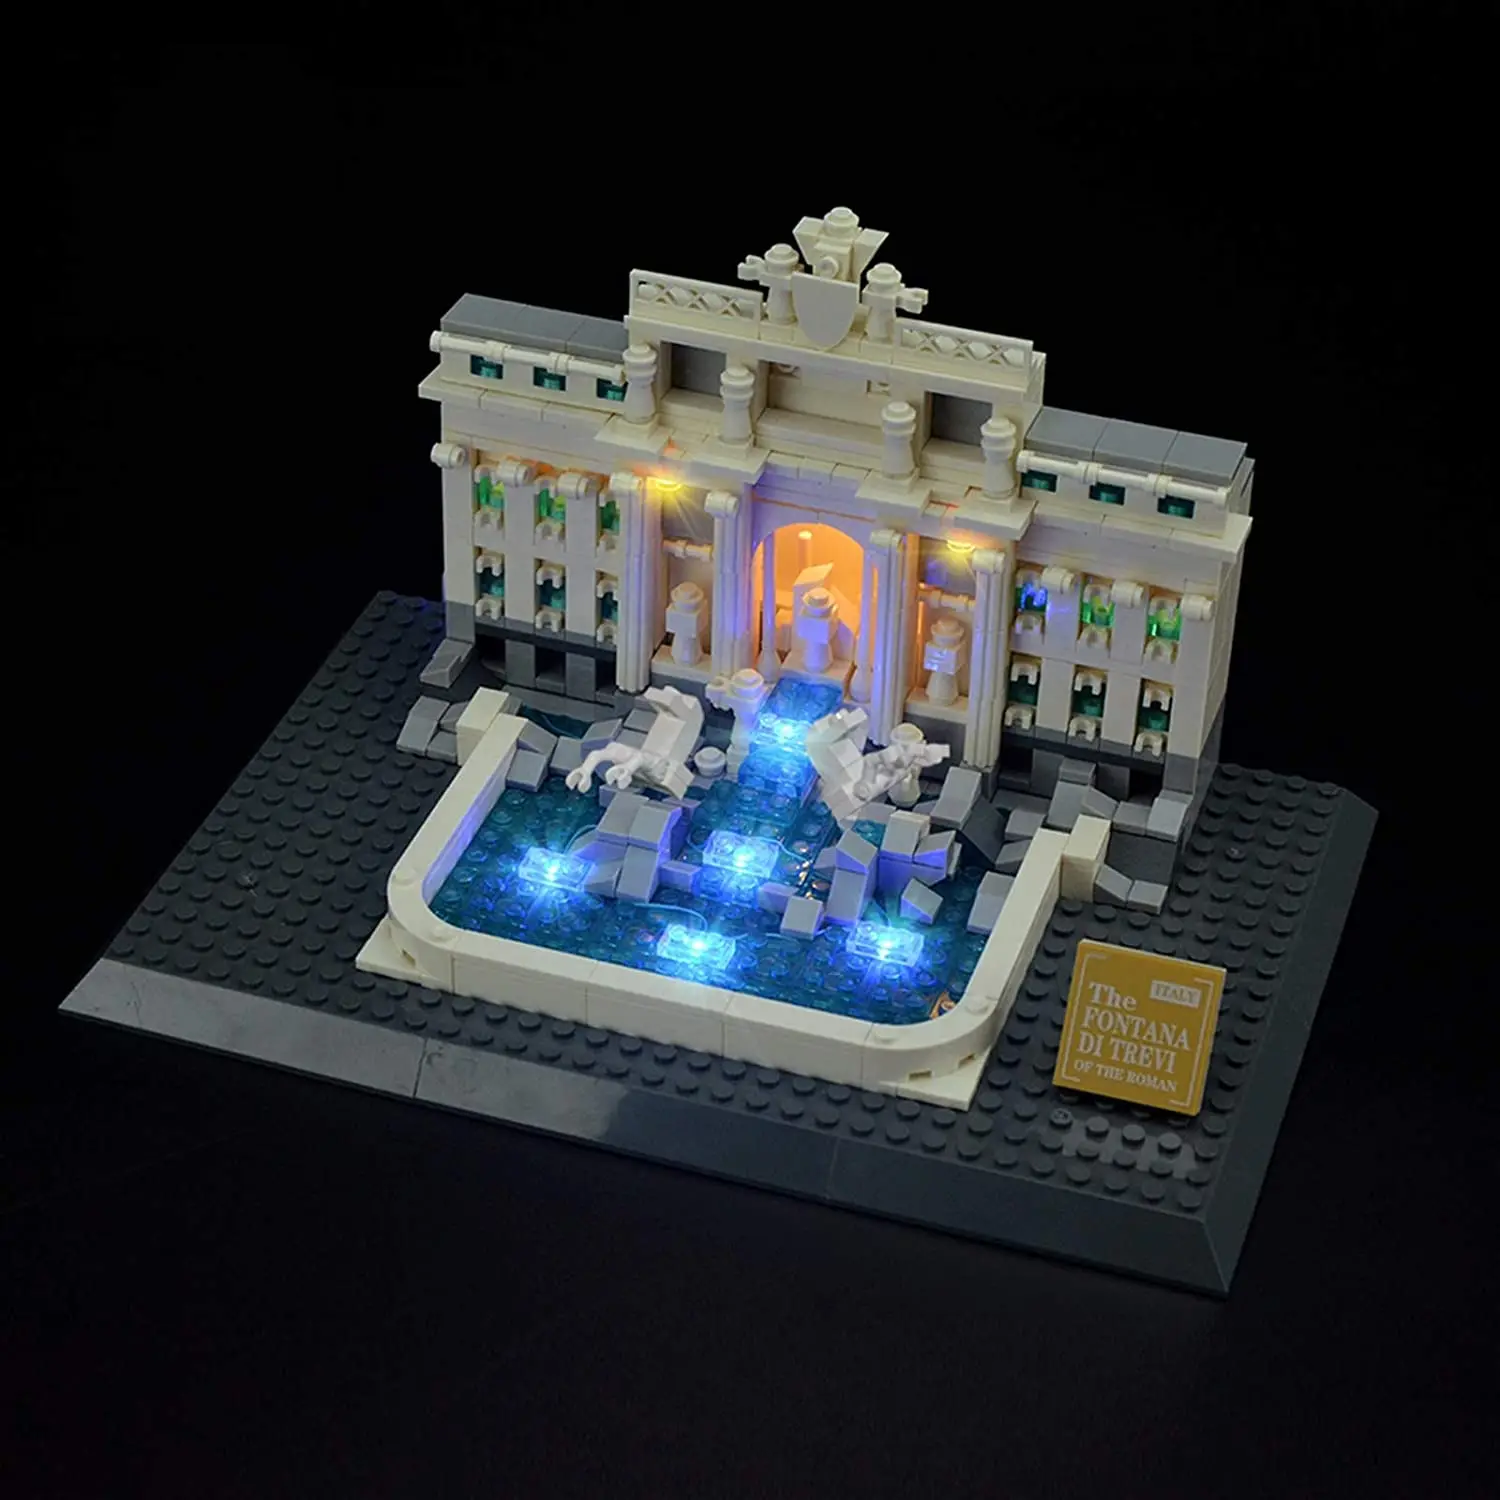 USB Light Kit for Lego Architecture Trevi Fountain 21020 Brick Building Included Model)